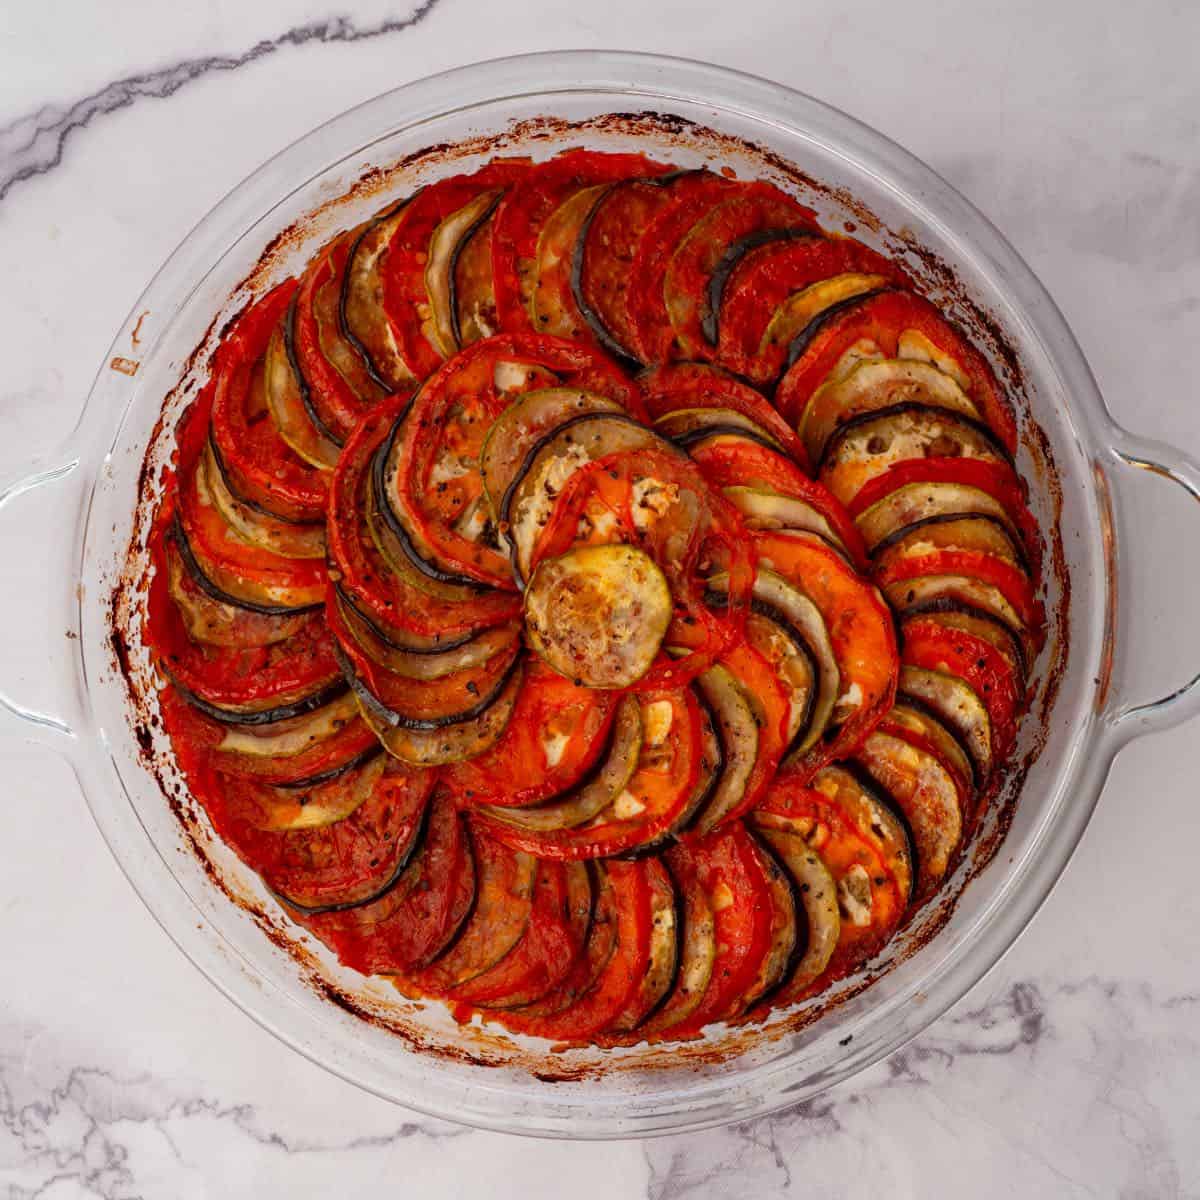 Low-carb ratatouille served on a plate with a fork.